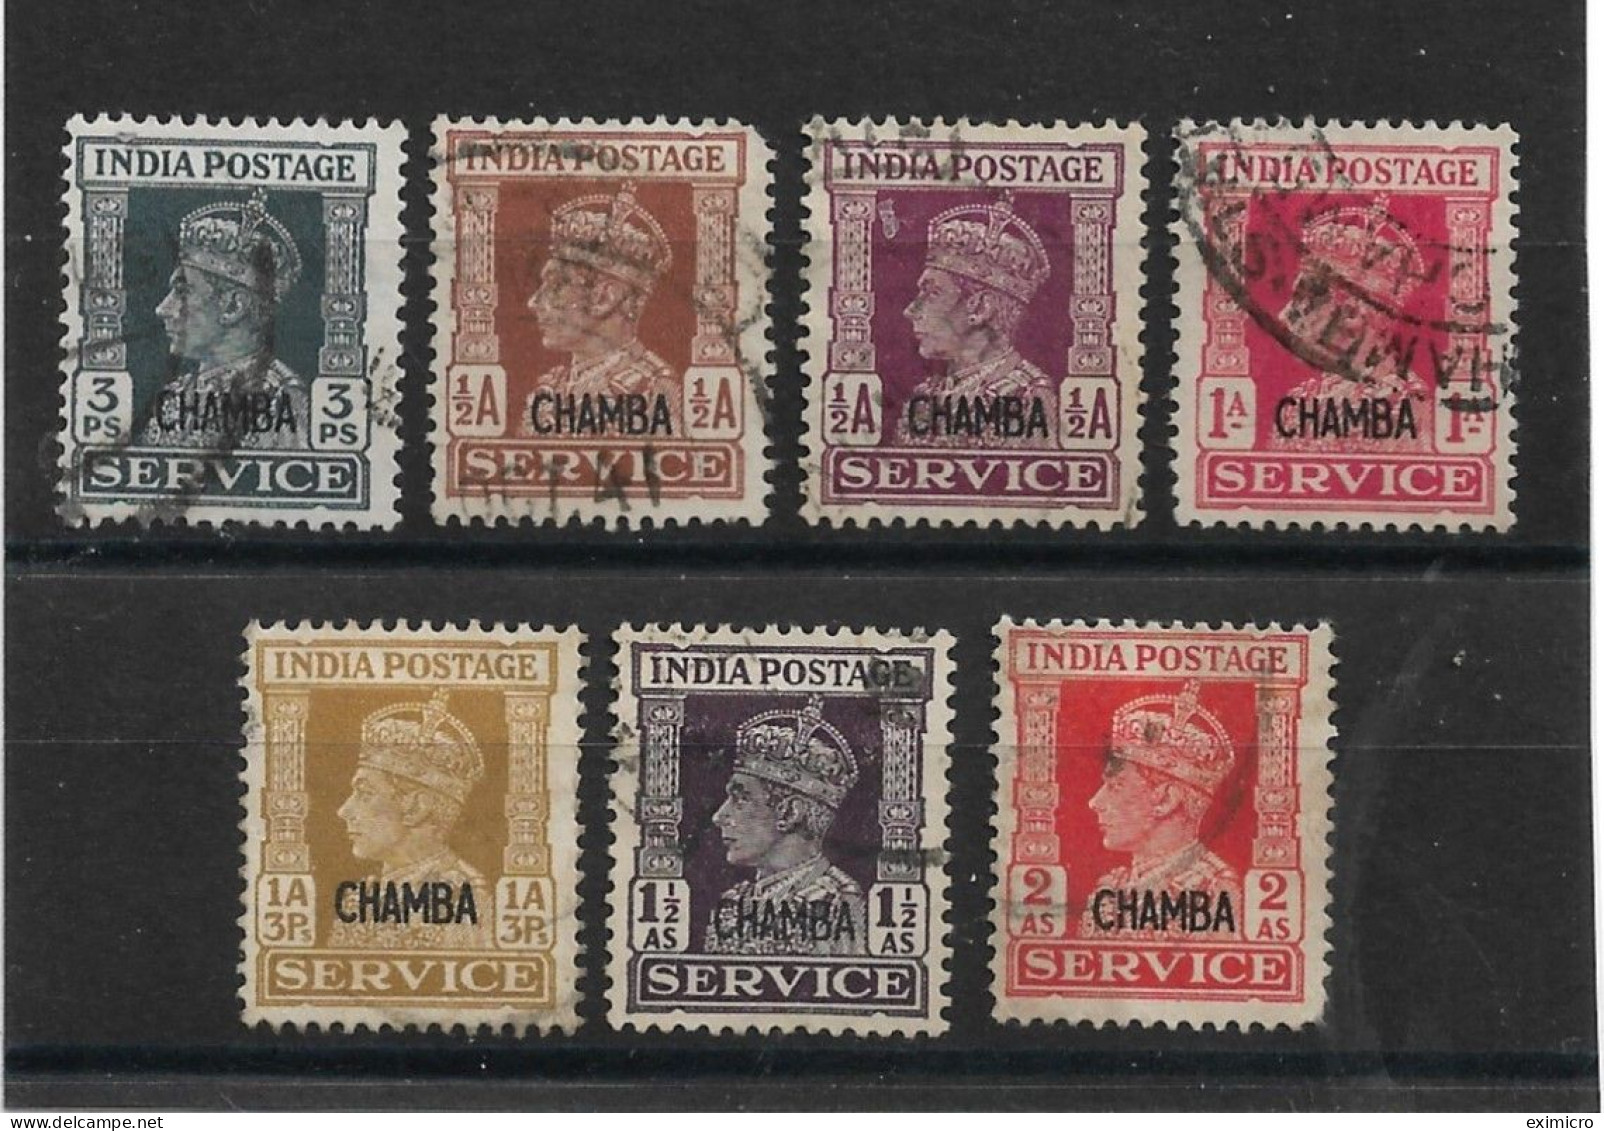 INDIA - CHAMBA 1940 - 1943 OFFICIAL VALUES TO 2a BETWEEN SG O72 AND SG O79 FINE USED Cat £62+ - Chamba